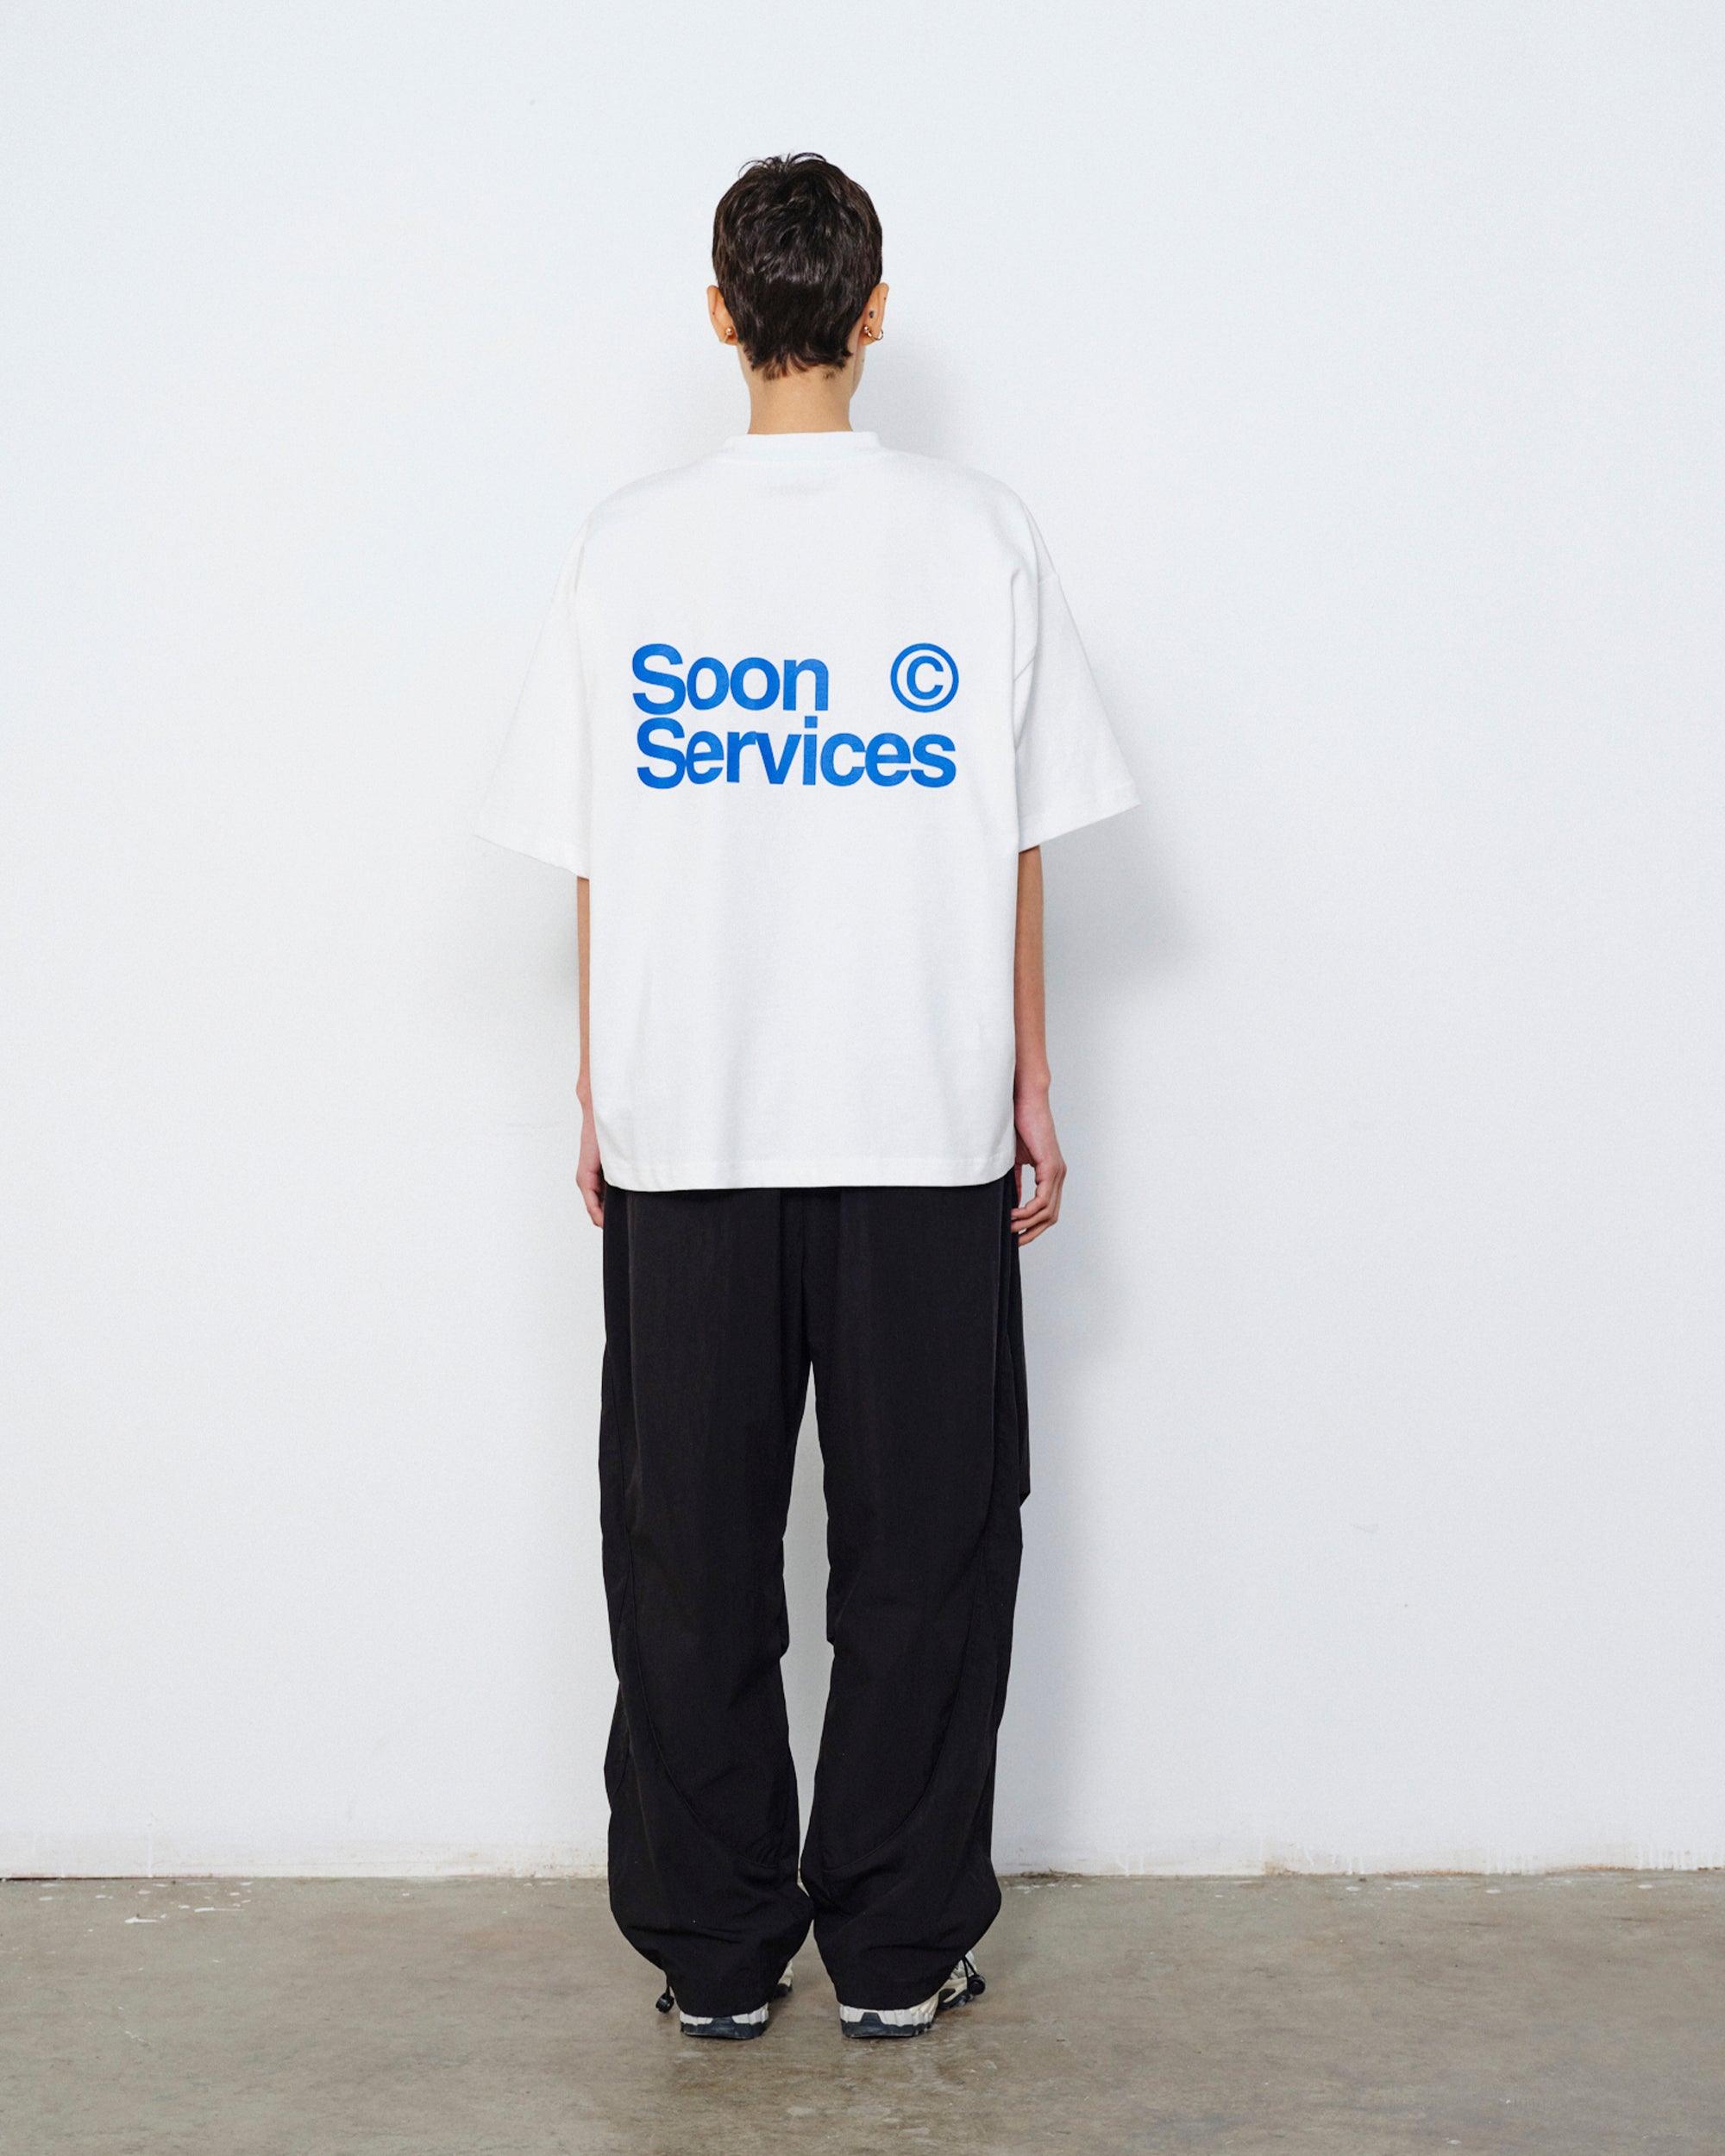 Soon Services T-Shirt - SOON TO BE ANNOUNCED